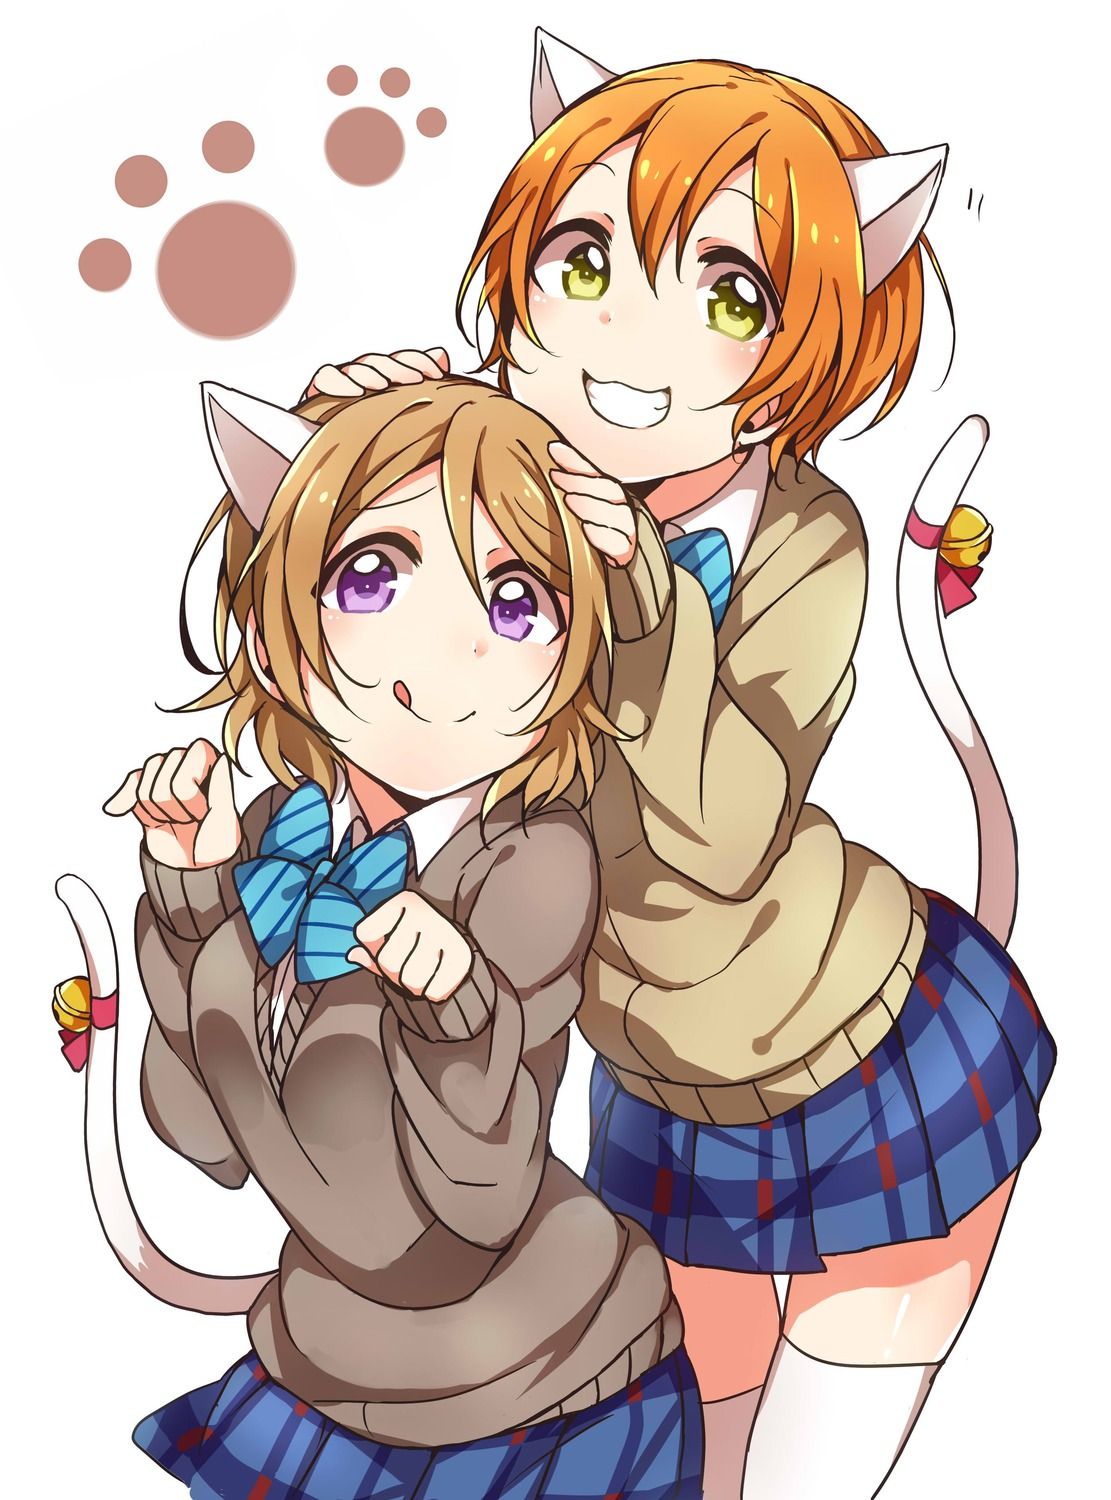 Love live! Wallpaper 05 [15 pictures] 5